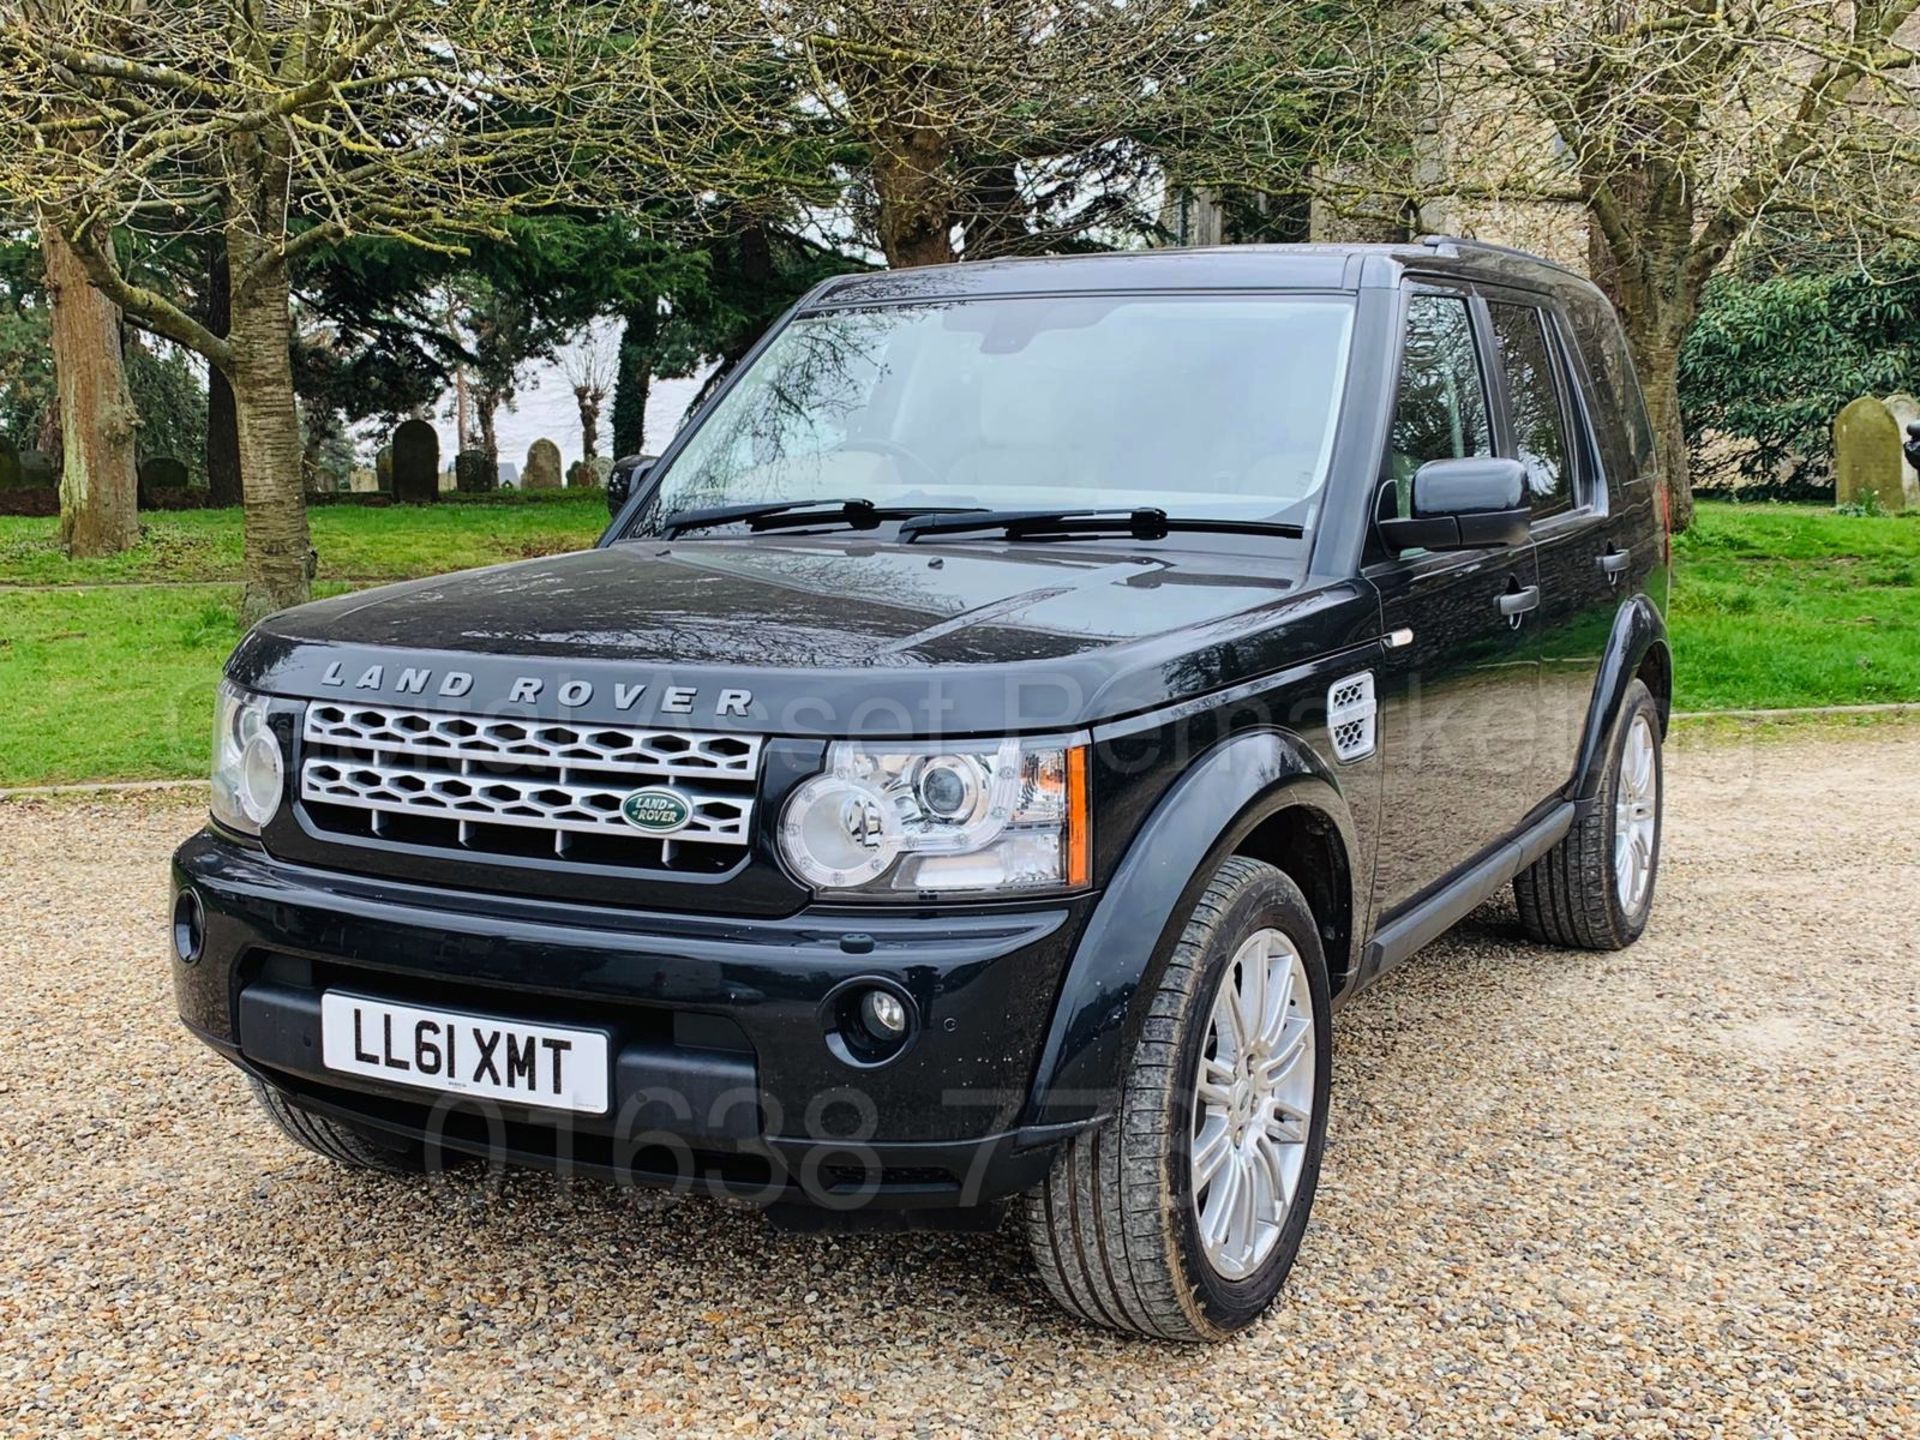 LAND ROVER DISCOVERY *HSE EDITION* 7 SEATER SUV (2012 MODEL) '3.0 SDV6- 8 SPEED AUTO' **HUGE SPEC** - Image 5 of 48